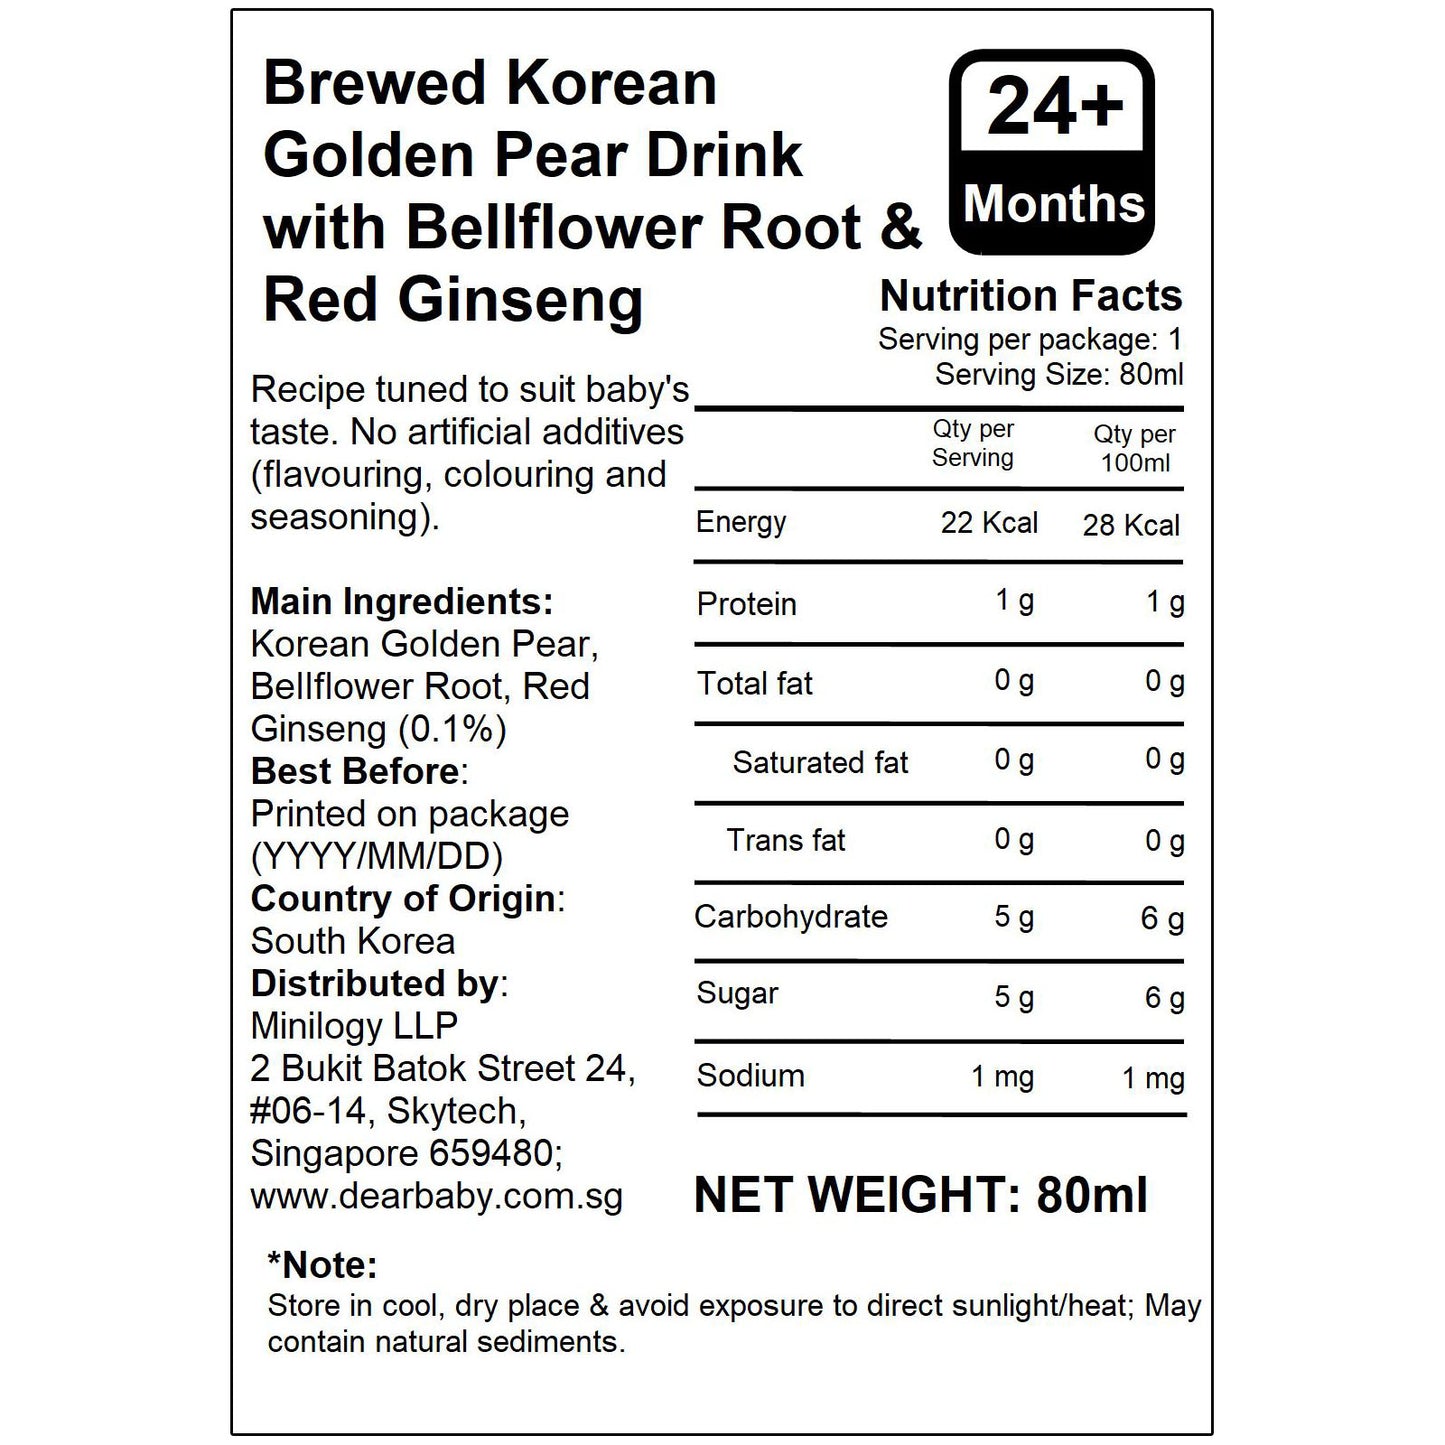 BeBecook - 20 x Brewed Korean Golden Pear Drink With Bellflower Root (10 X Jujube 10 X Red Ginseng)